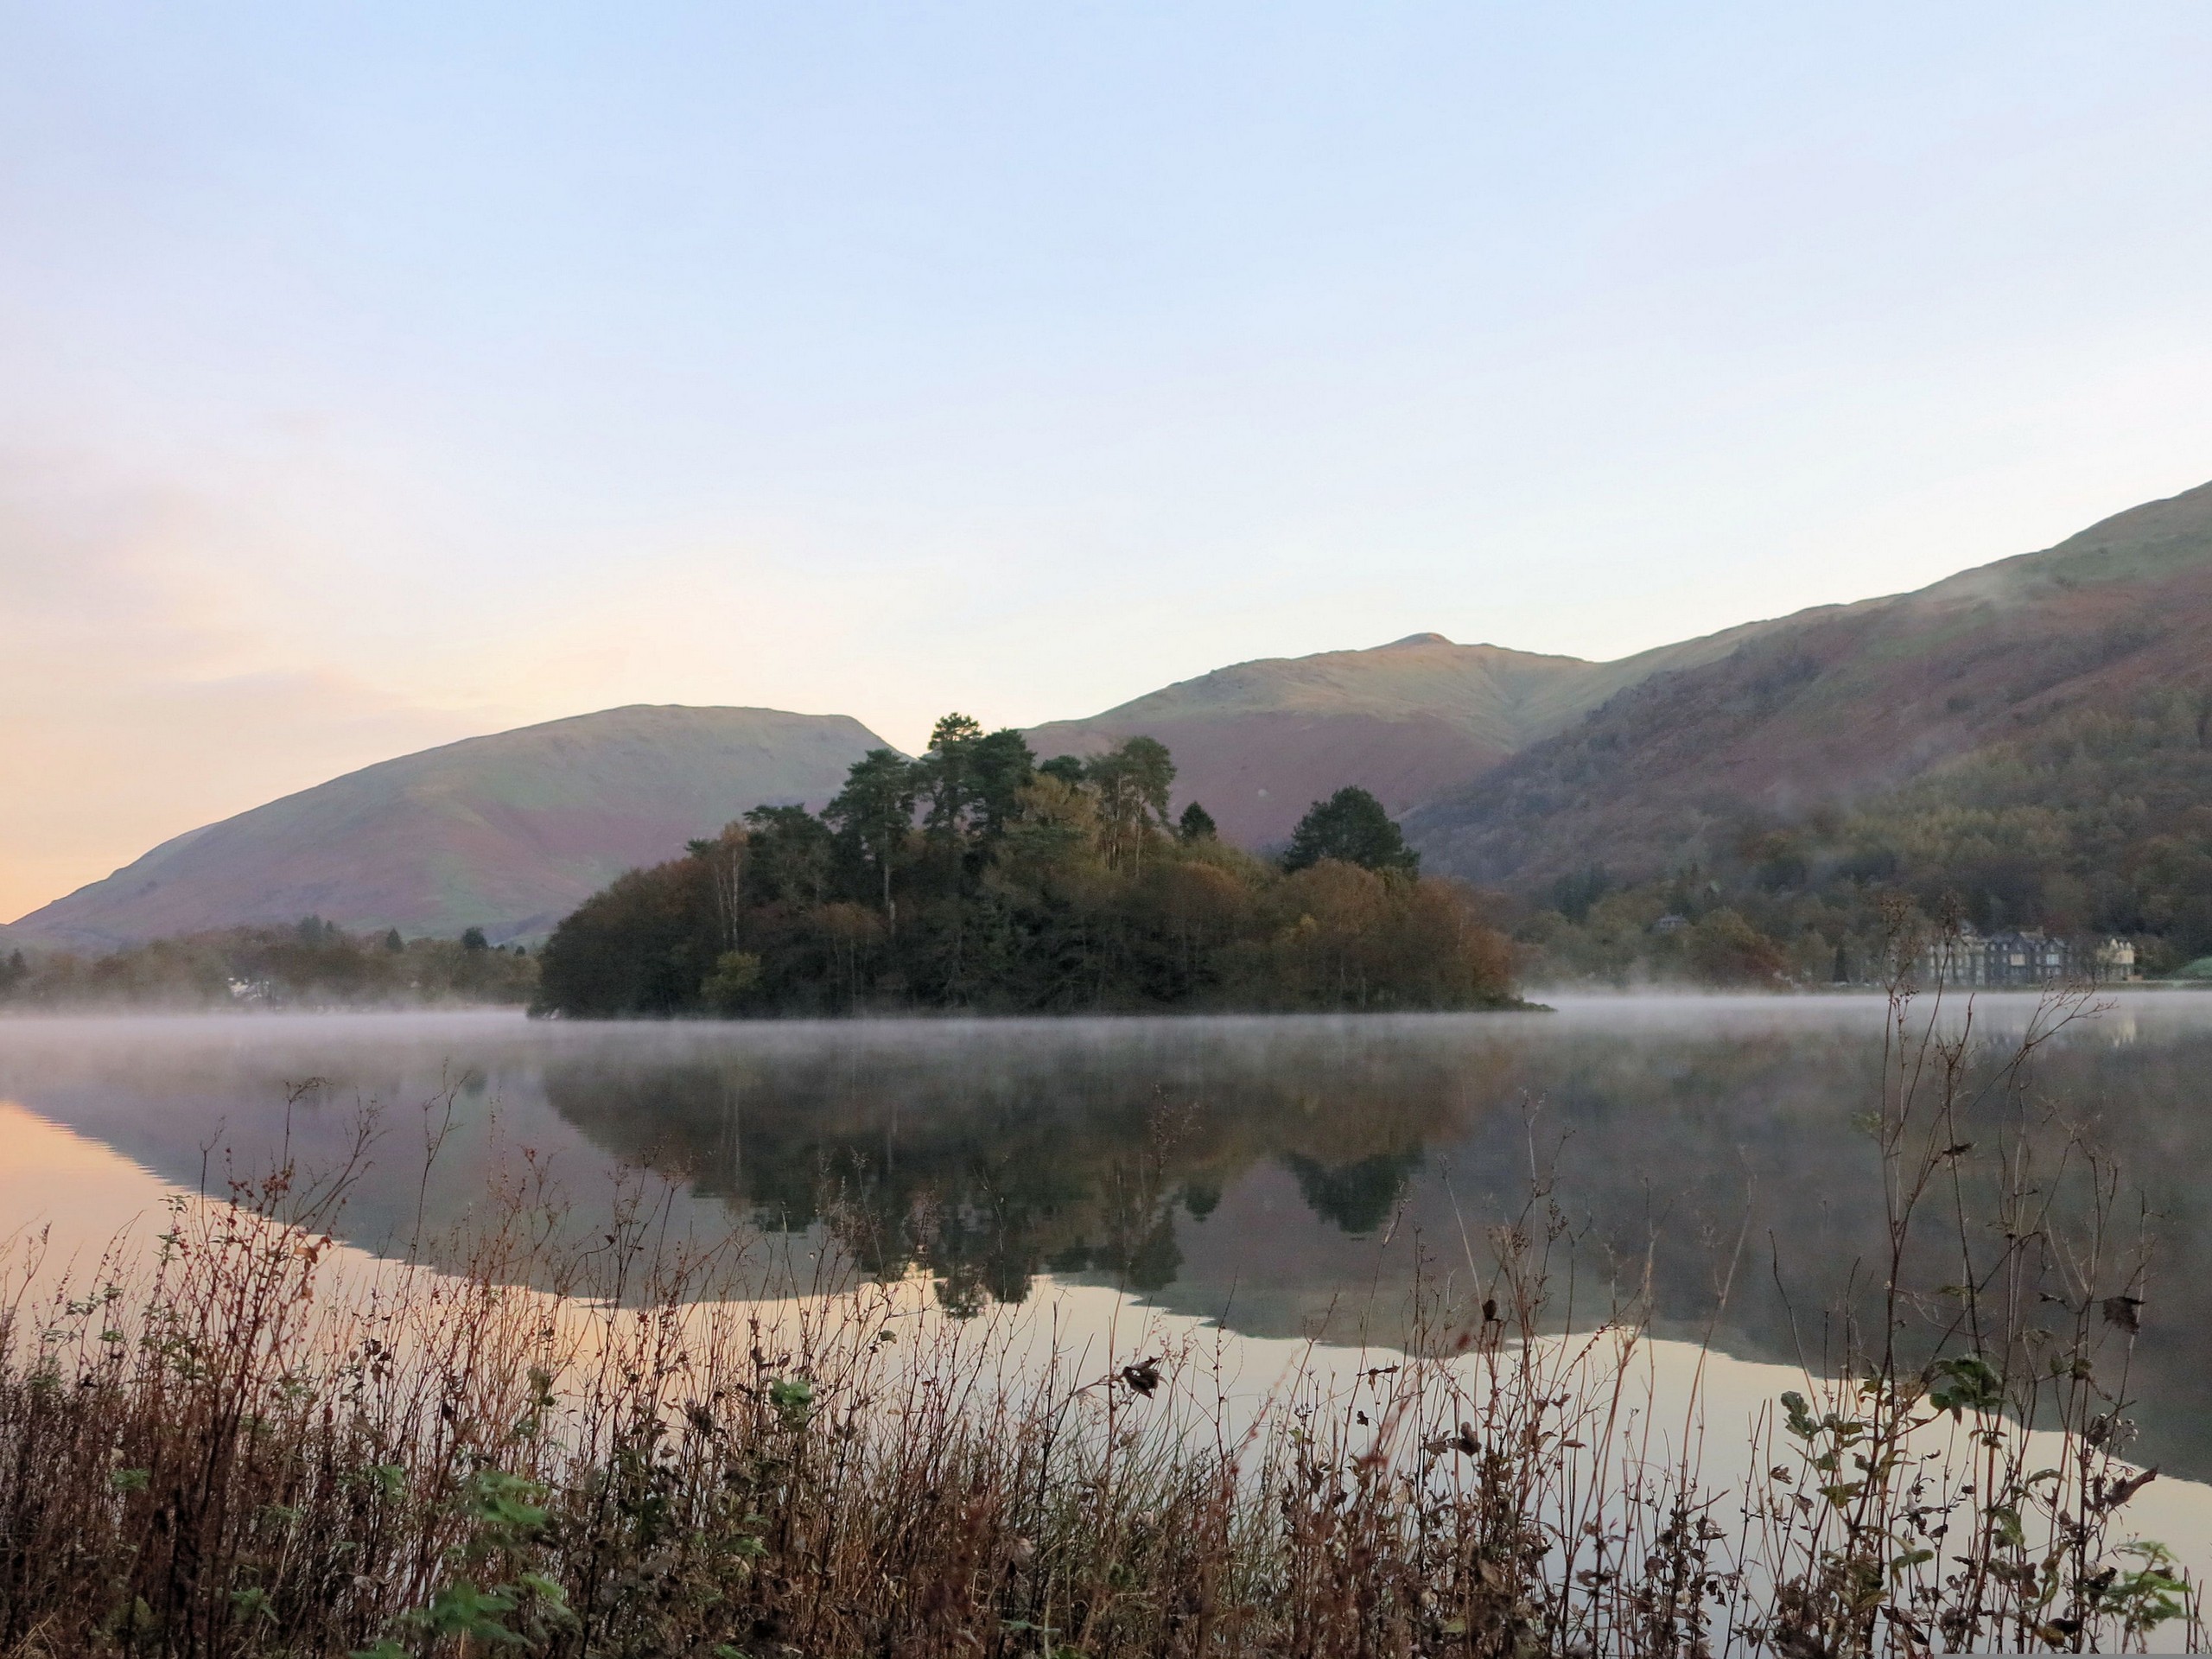 Misty day over the Grasmere Lake